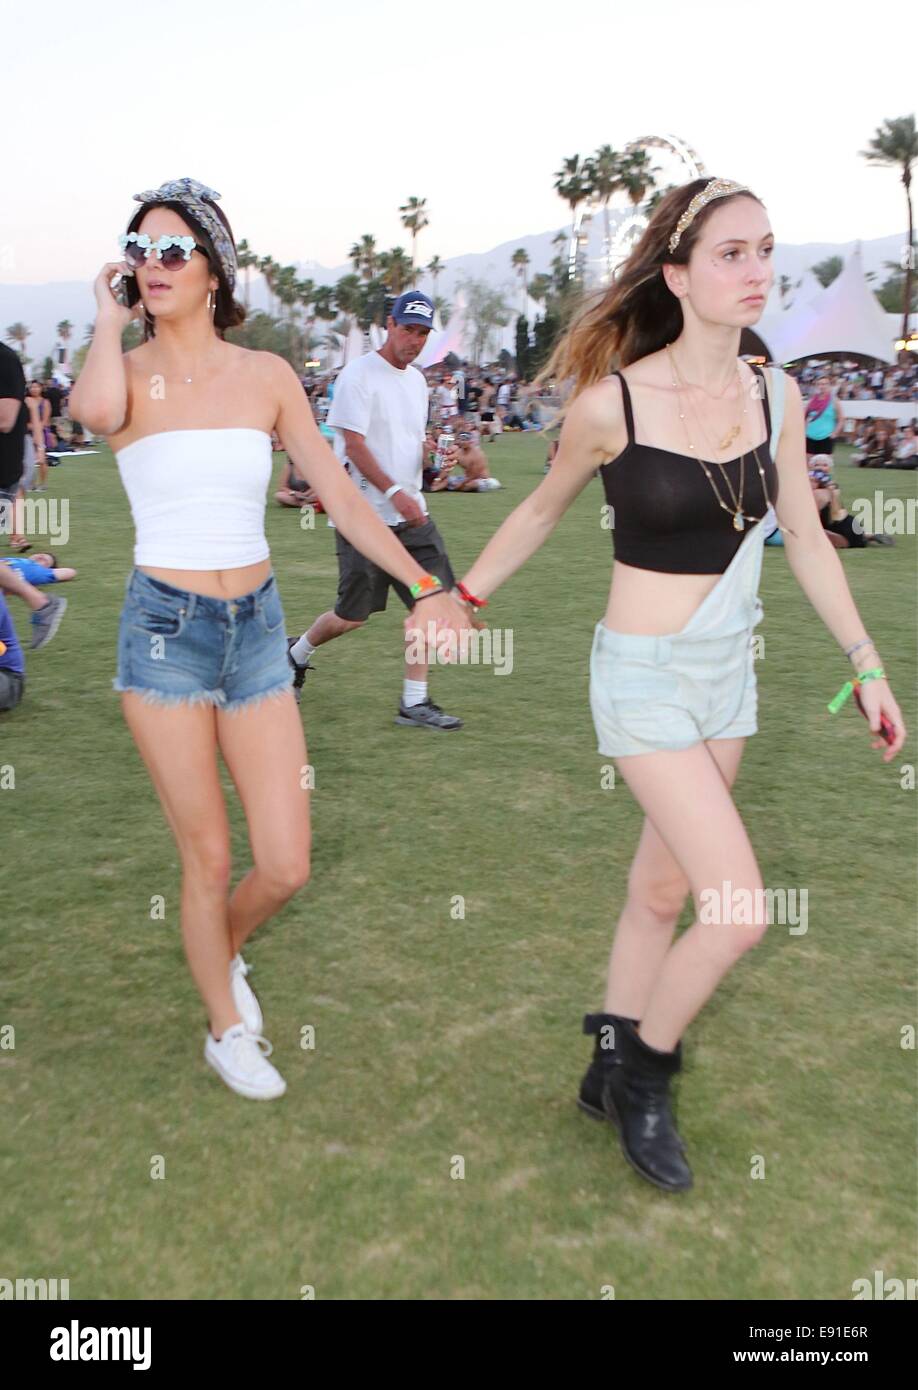 Kylie Jenner: Coachella Day 3 Outfit